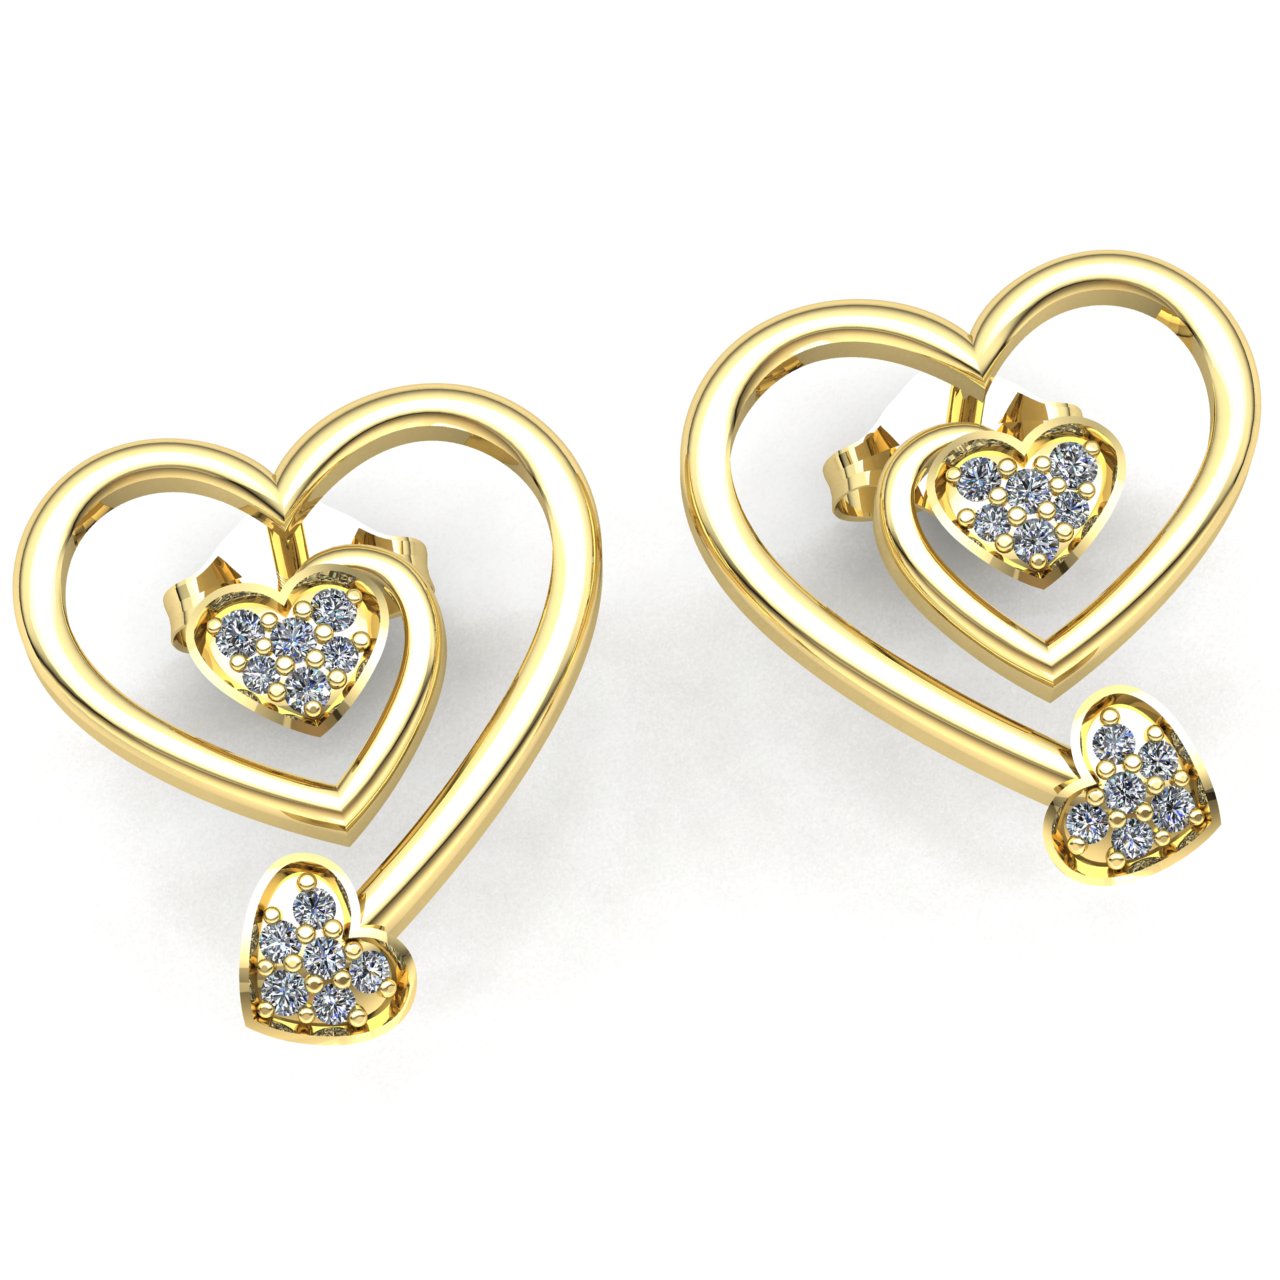 Jewel We Sell Genuine 0.5ct Round Cut Diamond Ladies Fashion Heart Stud Earrings Solid 18K White, Yellow, or Rose Gold F VS1